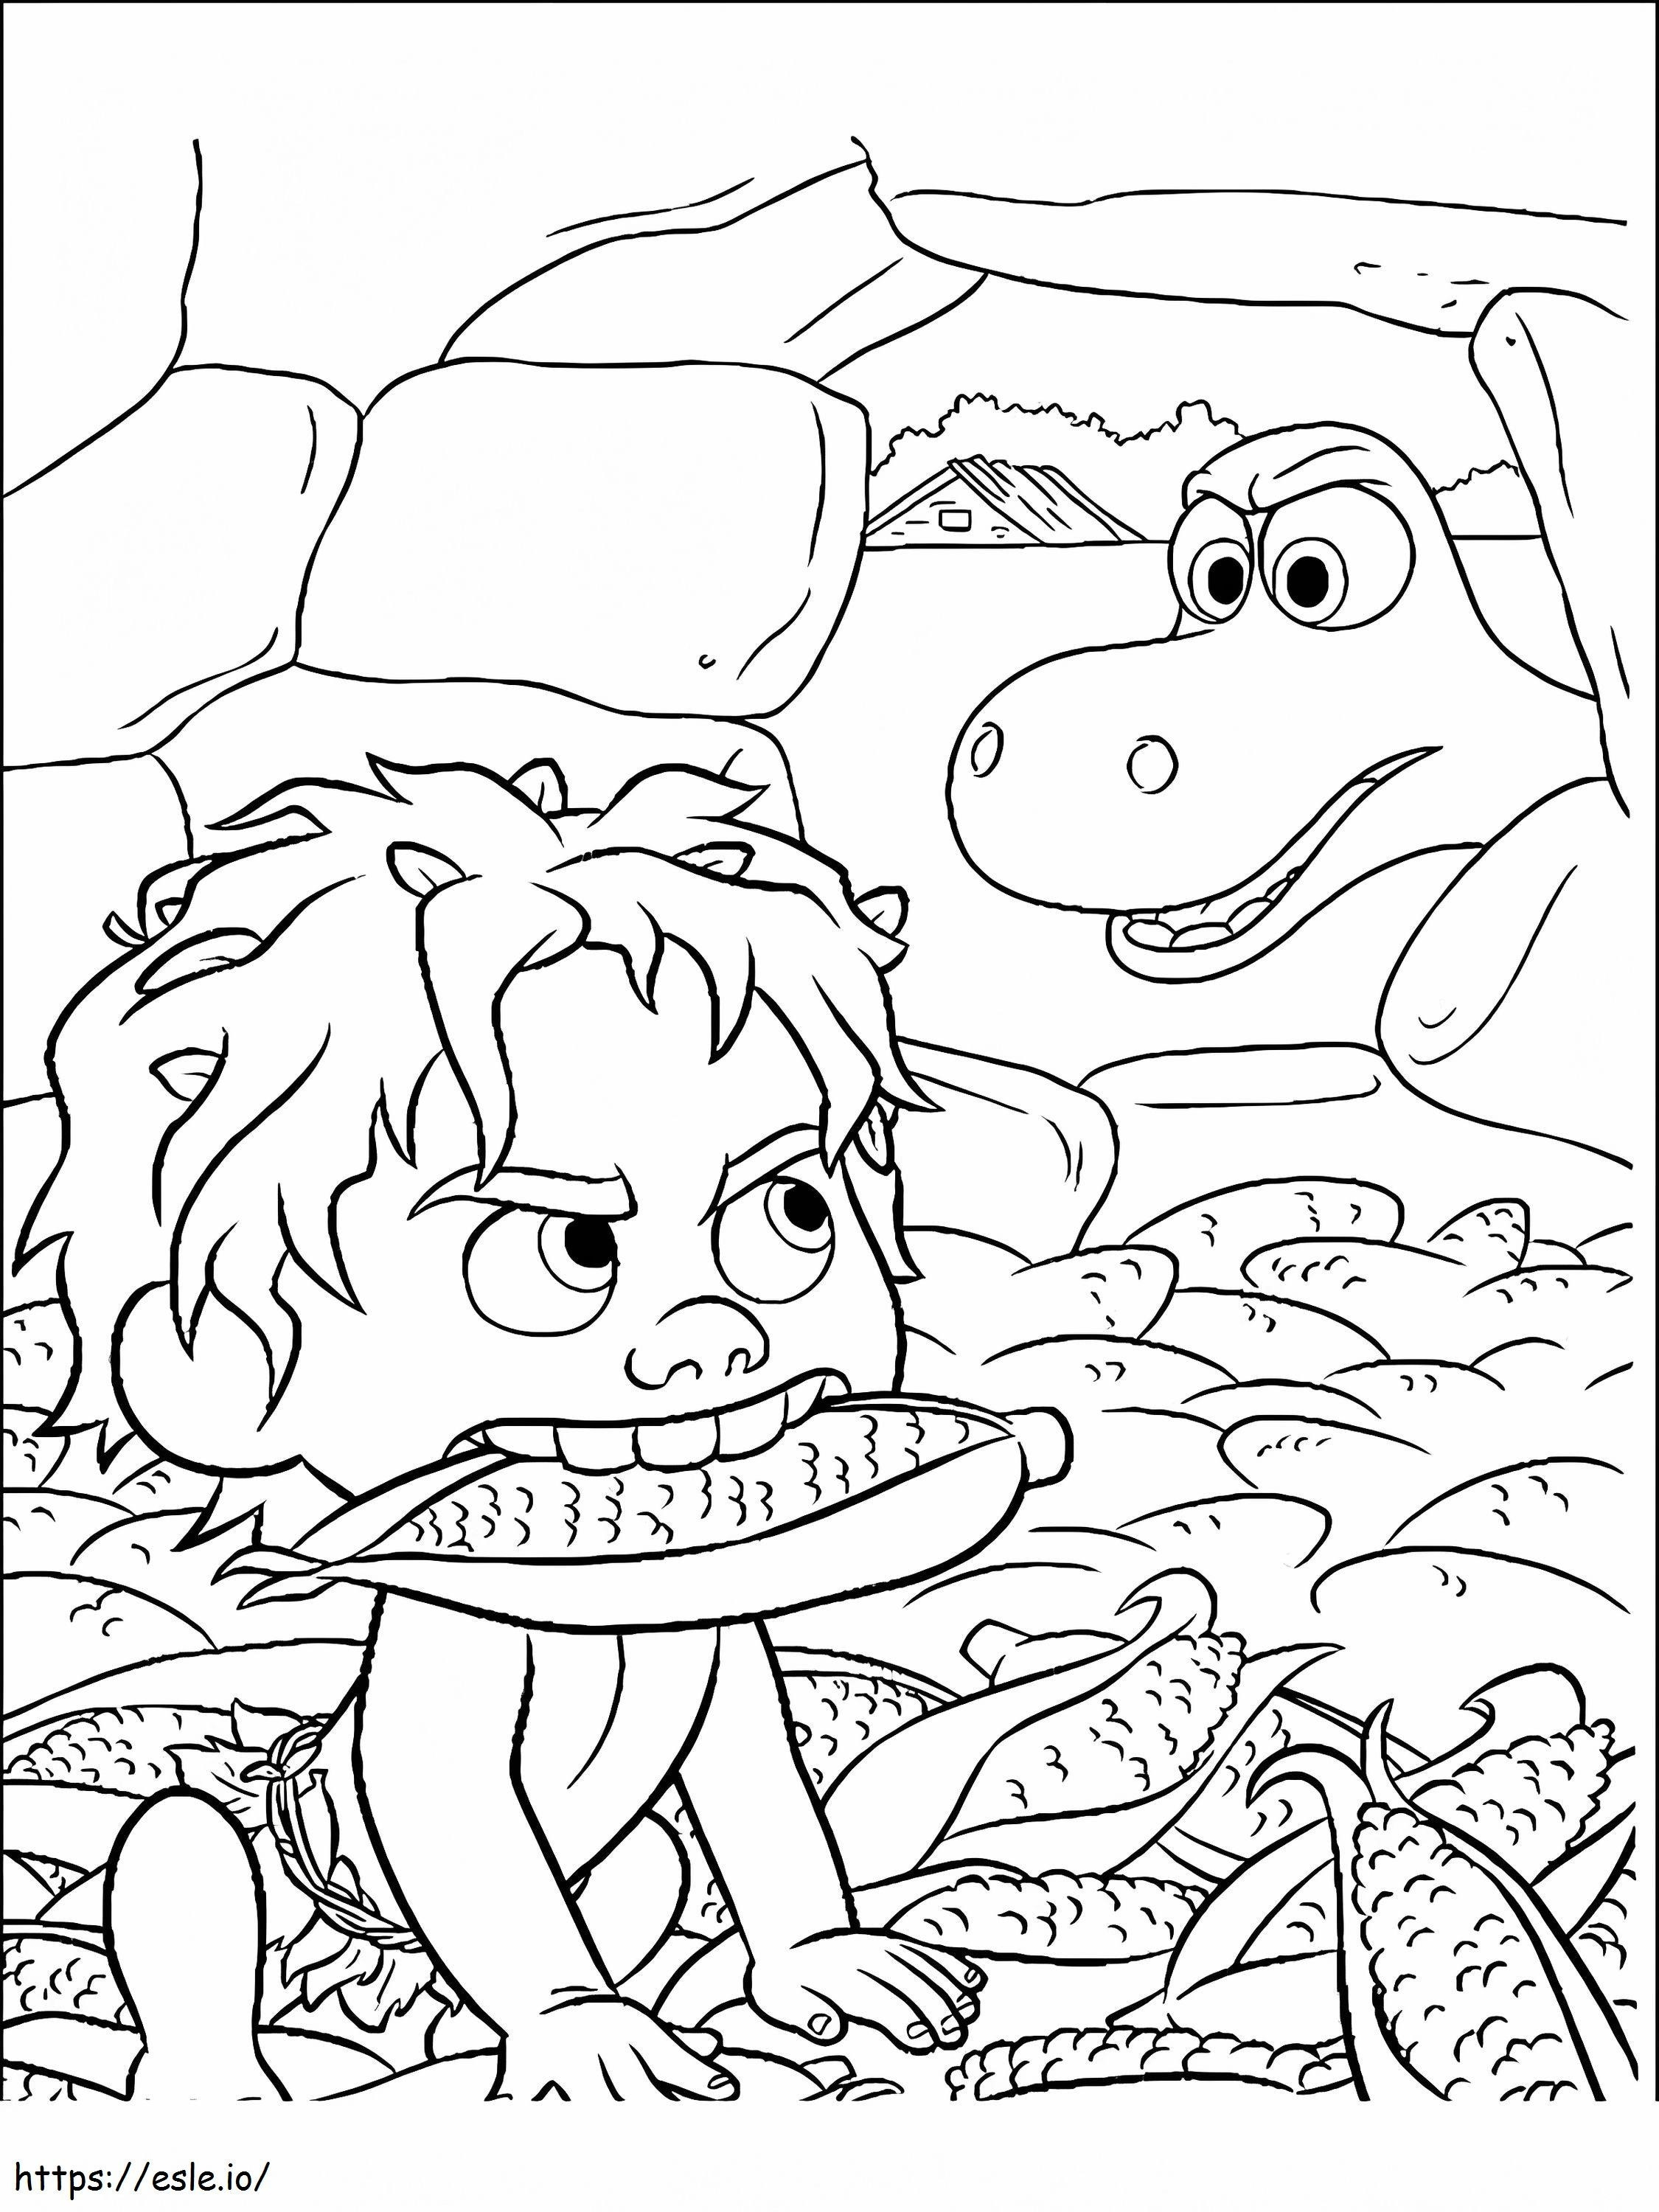 Fun On Arlo And Spot coloring page